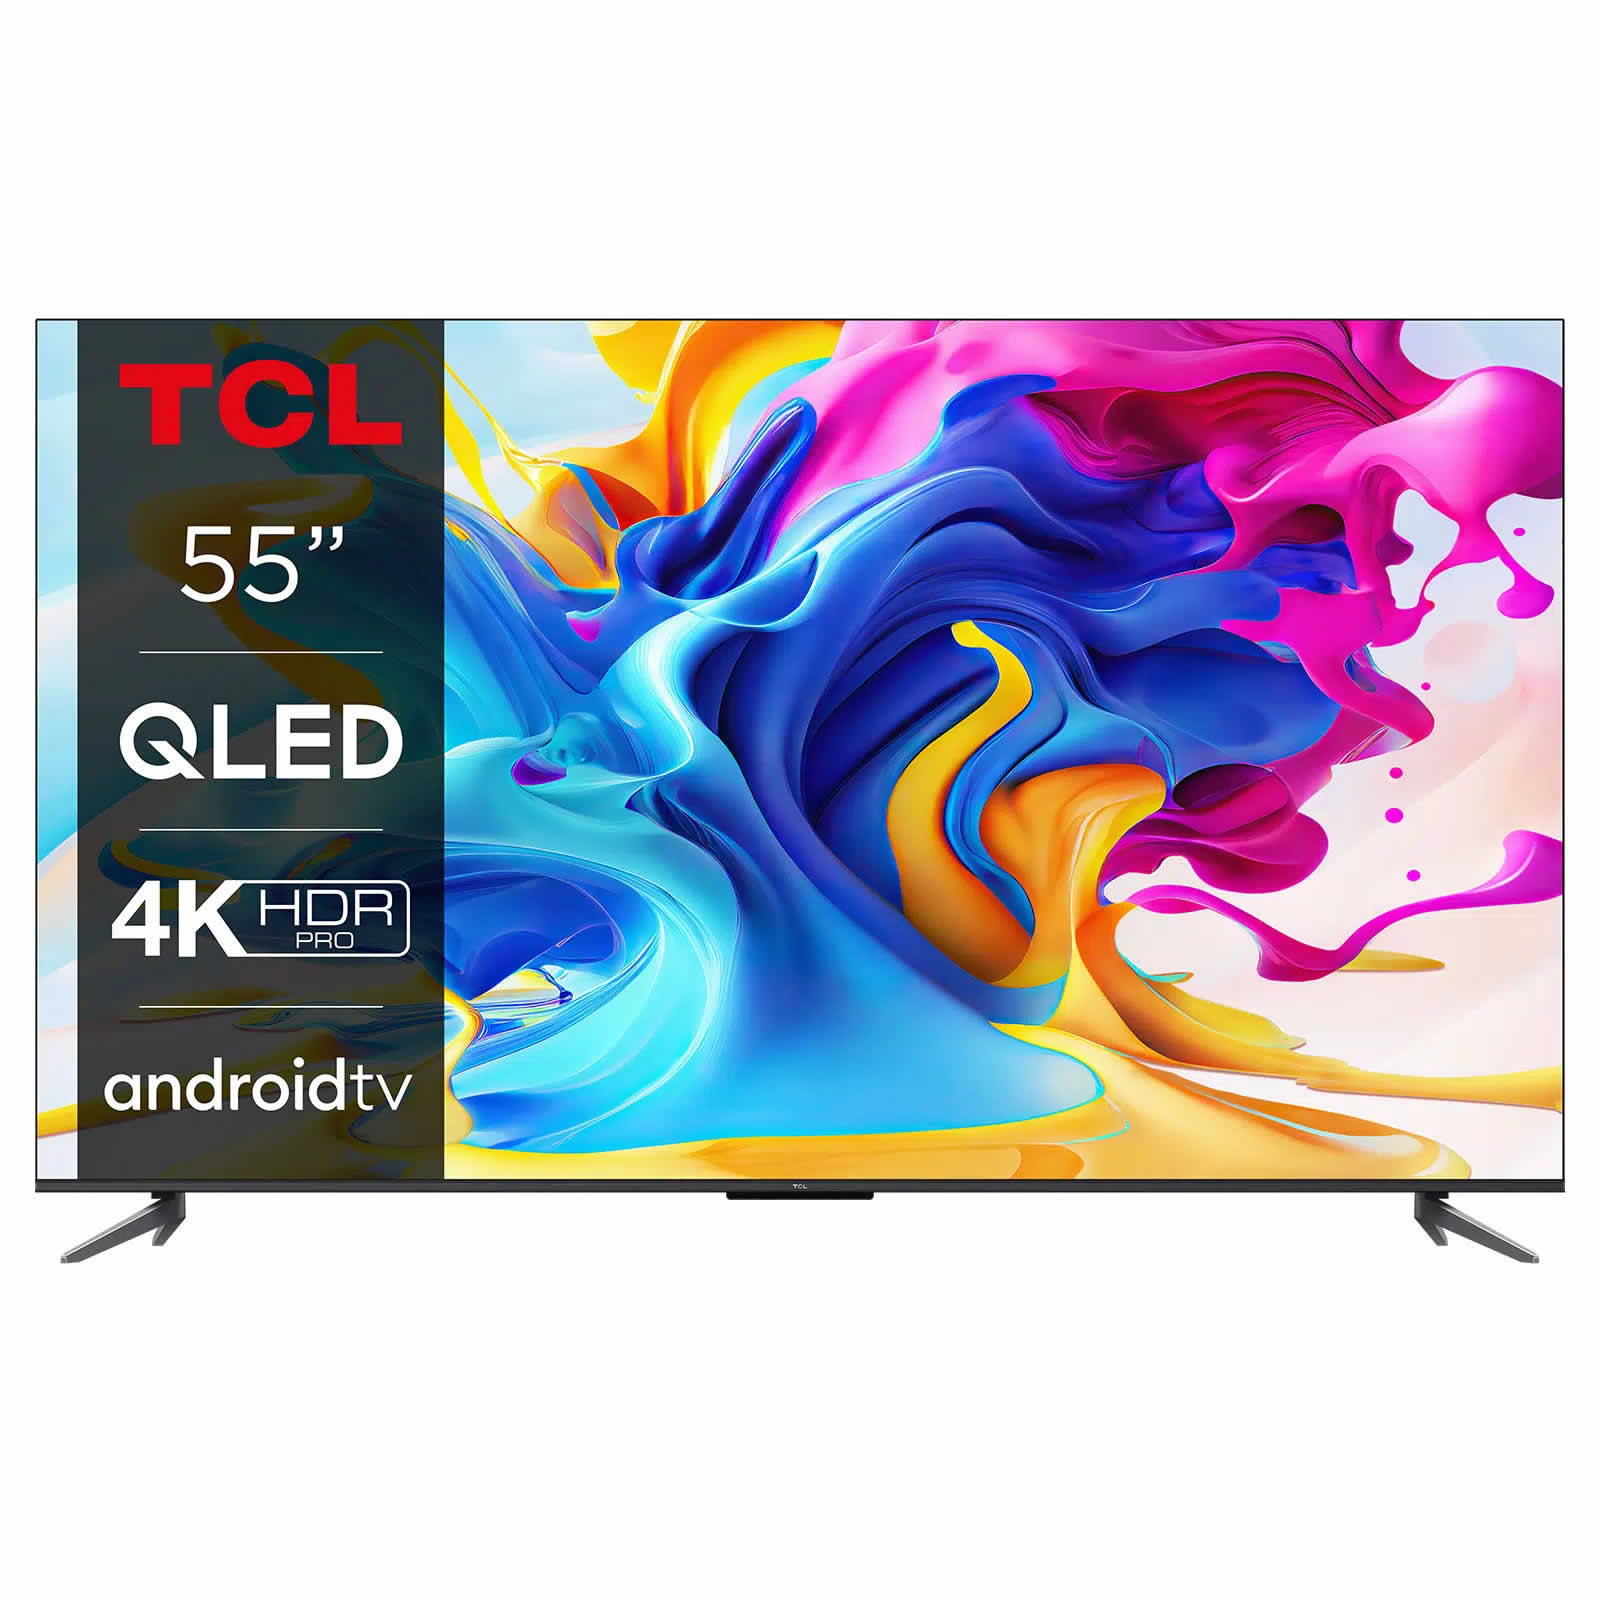 TCL 55inch 4K UHD QLED SMART TV WiFi Android